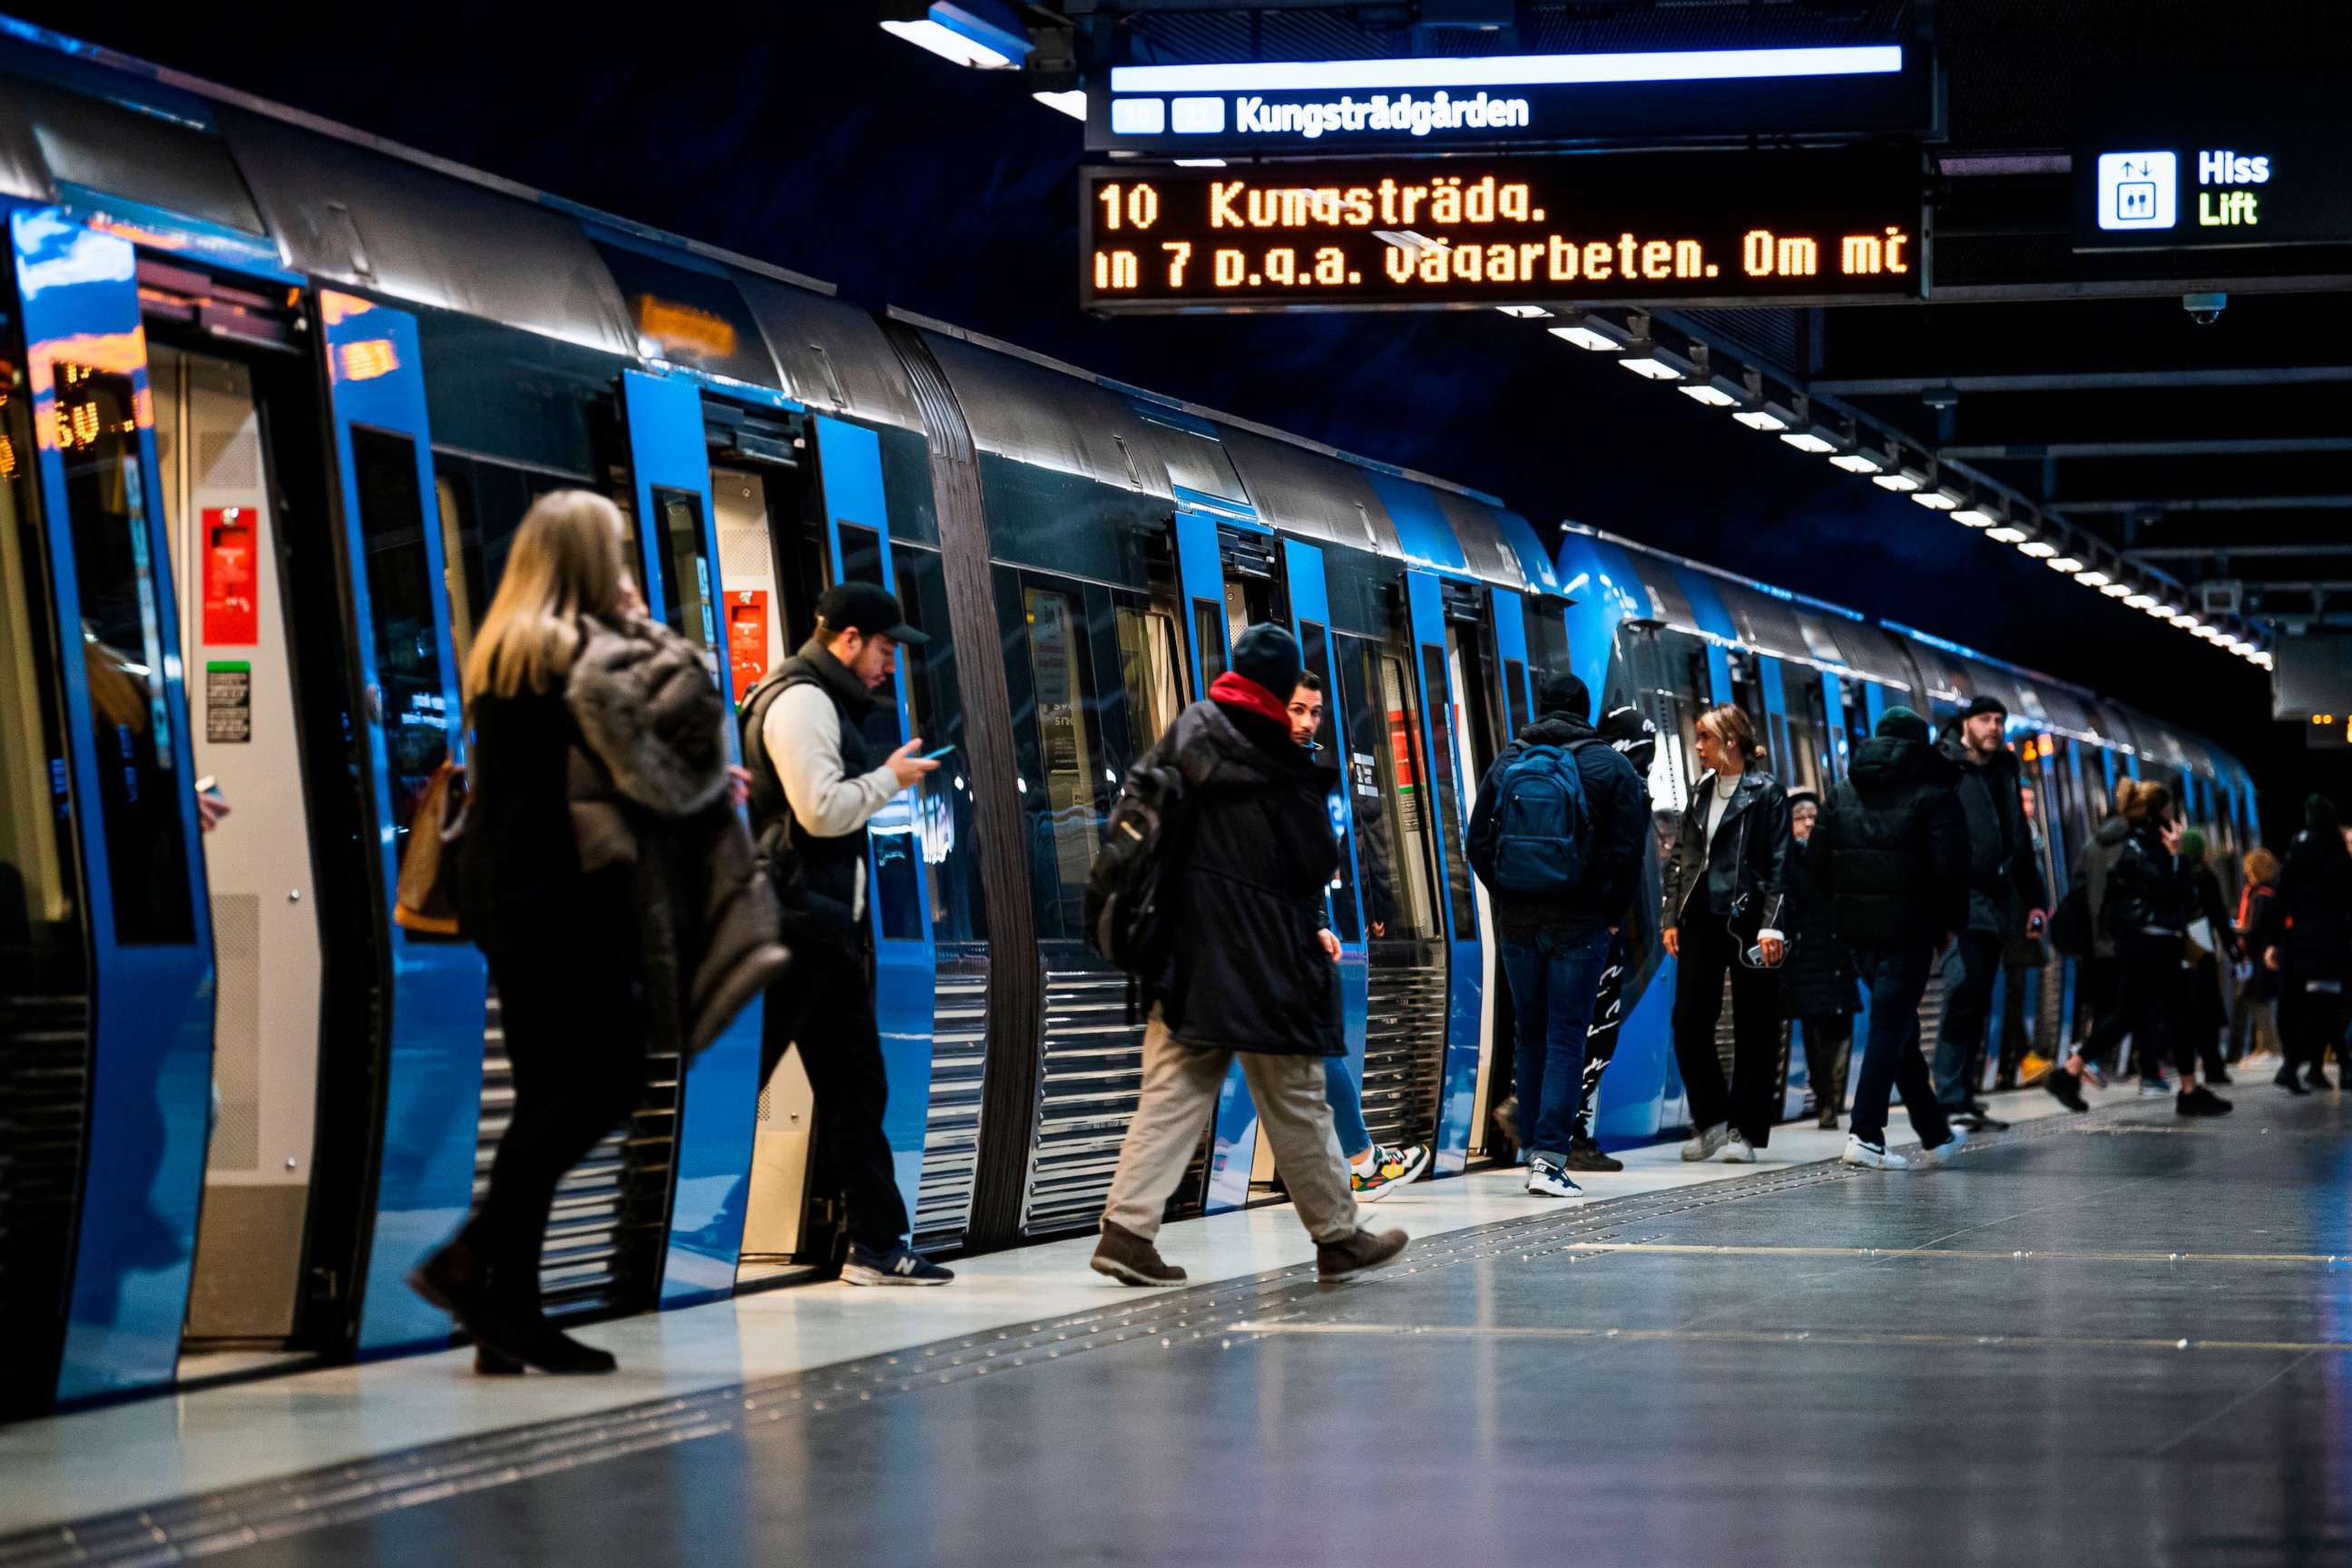 PHOTO: Daily commuters arrive with the metro at Stockholm's central station, Dec. 3, 2020, during the novel coronavirus COVID-19 pandemic.